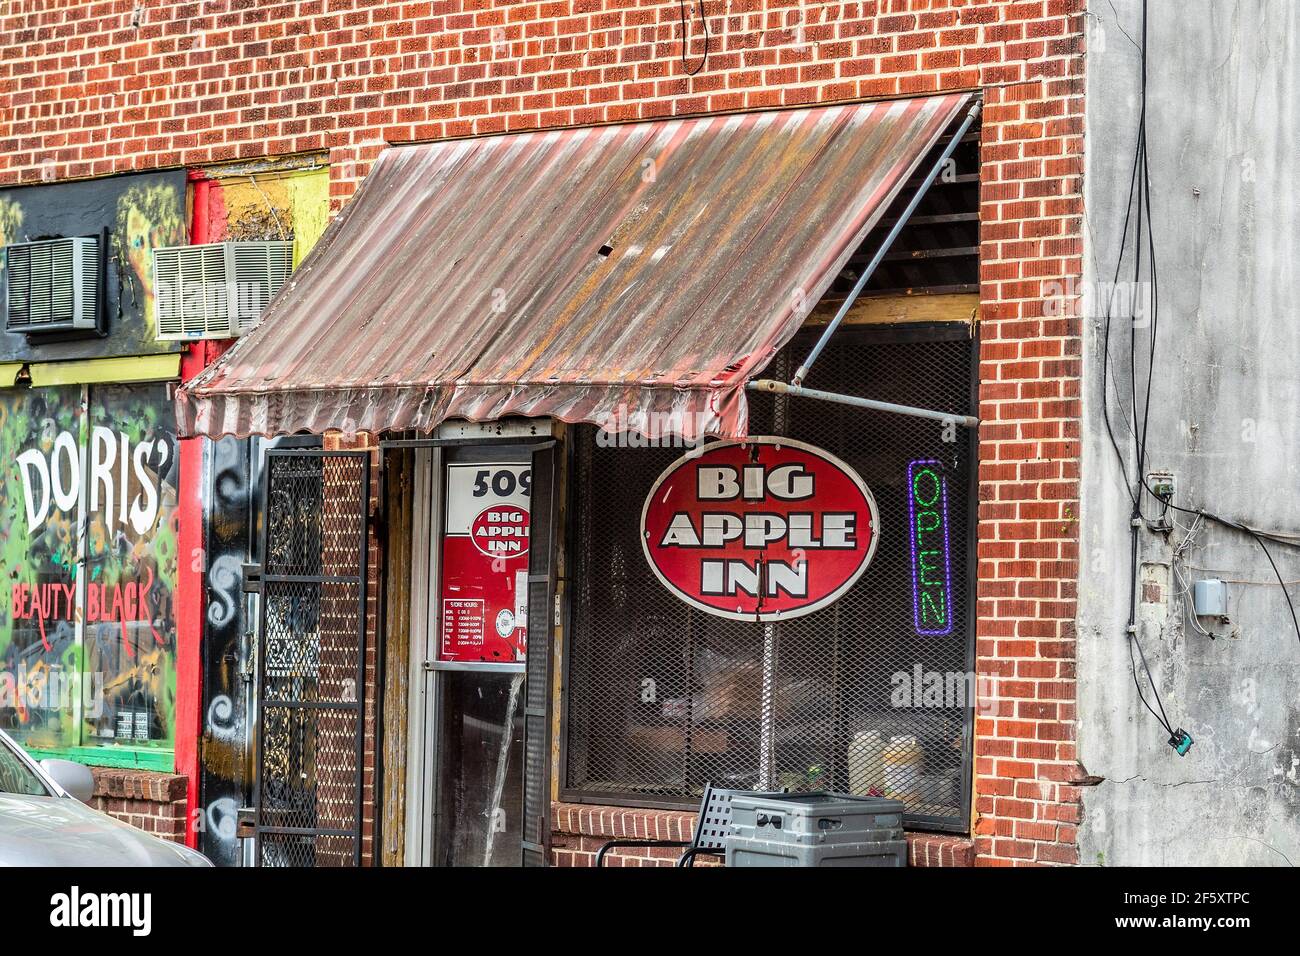 Big Apple Inn on Farish Street famous for pig’s ear sandwiches and as a gathering place during the Civil Rights Movement, Jackson, Mississippi, USA. Stock Photo